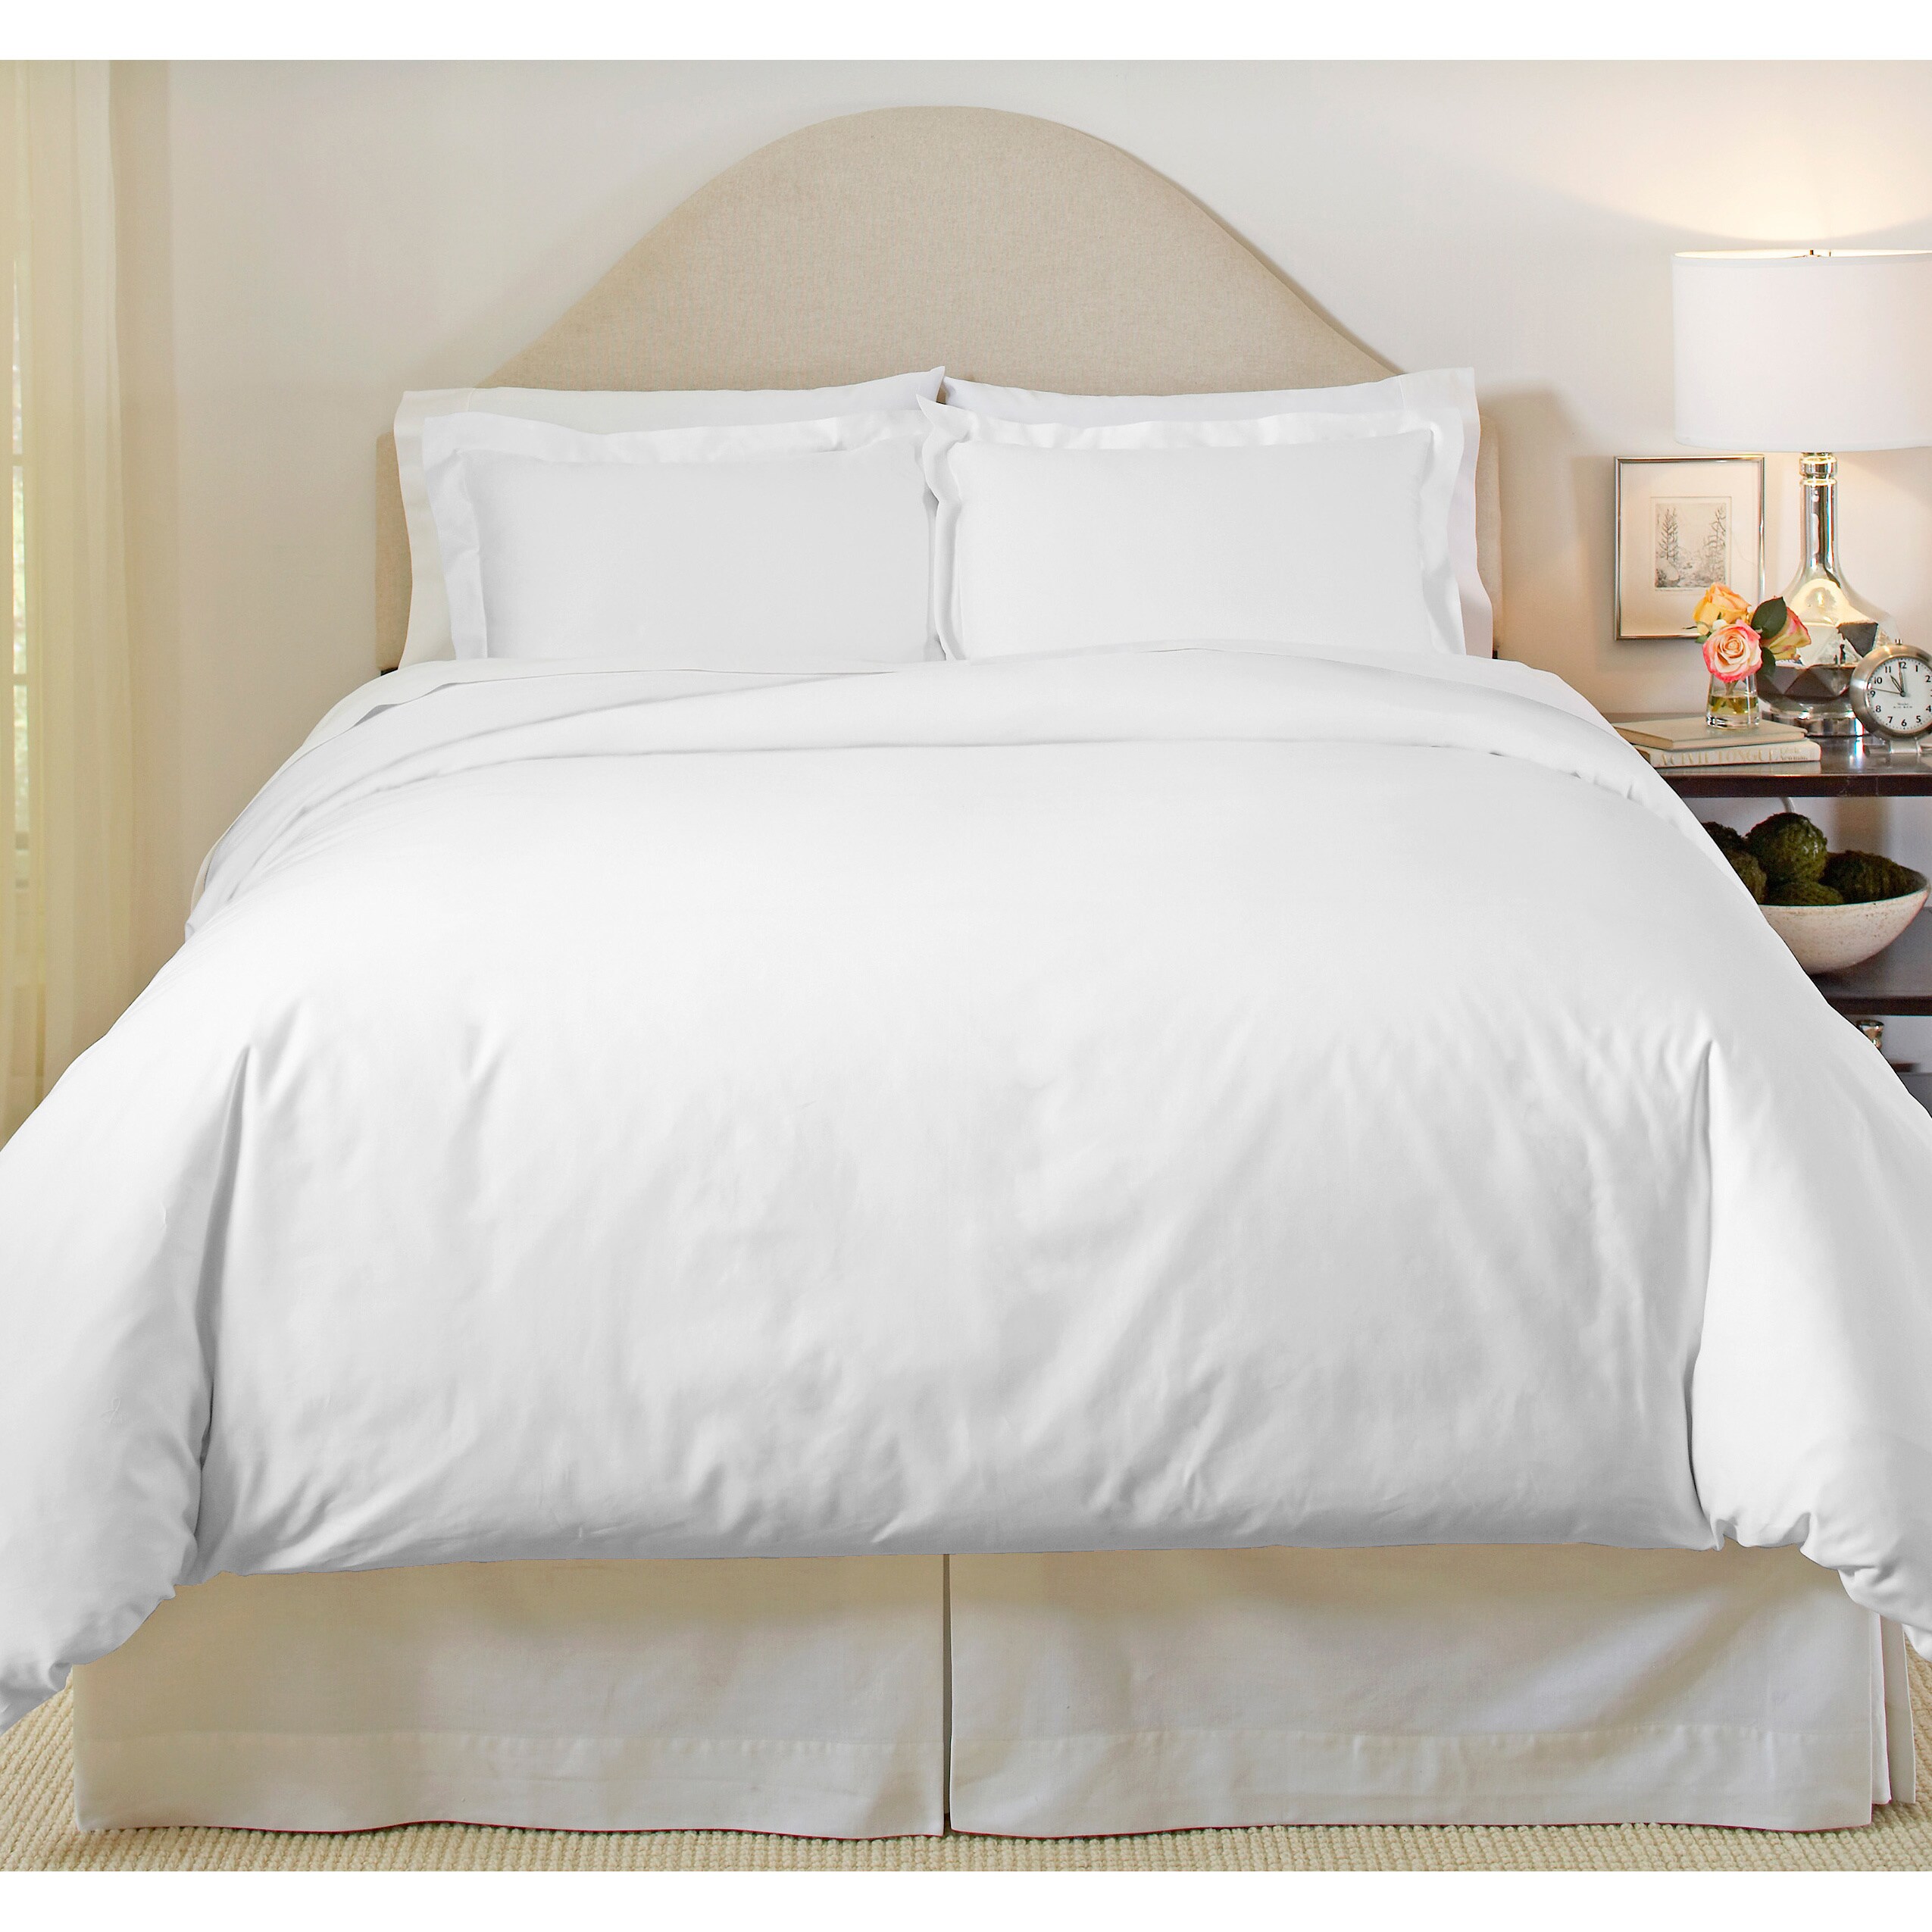 Double Bed Duvet Cover Set Chocolate Hotel Egyptian Cotton 400